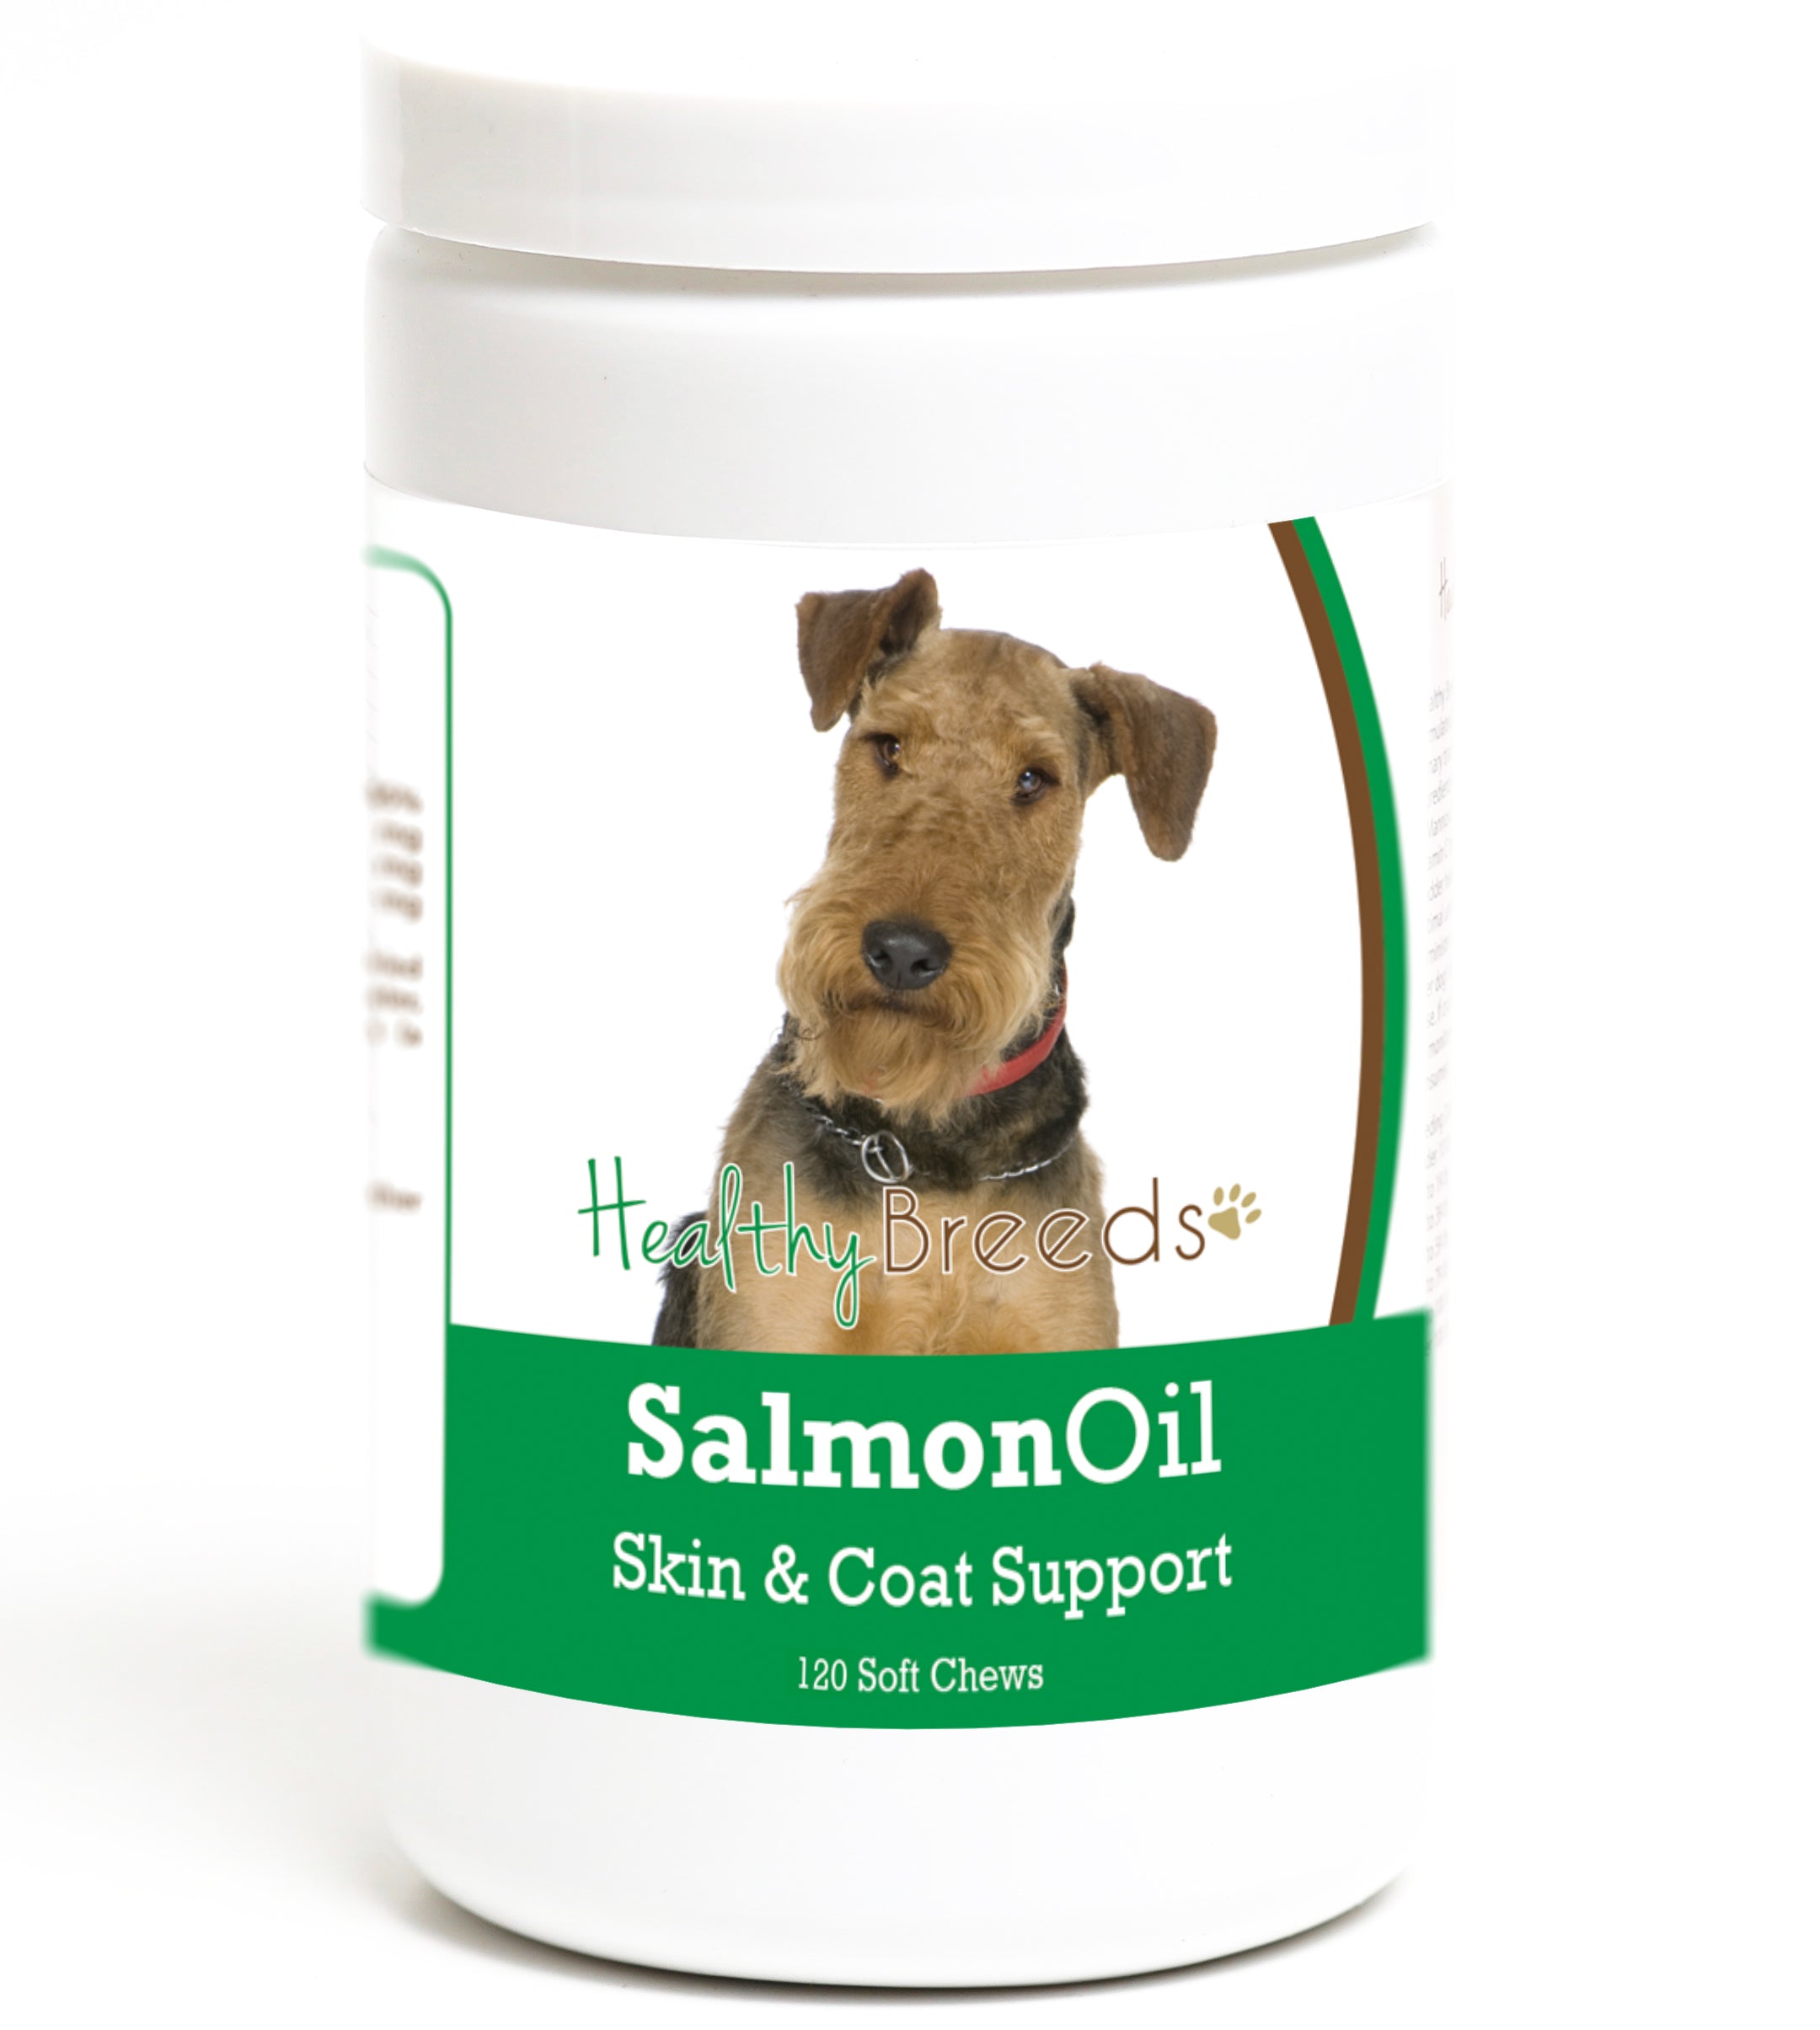 Airedale Terrier Salmon Oil Soft Chews 120 Count